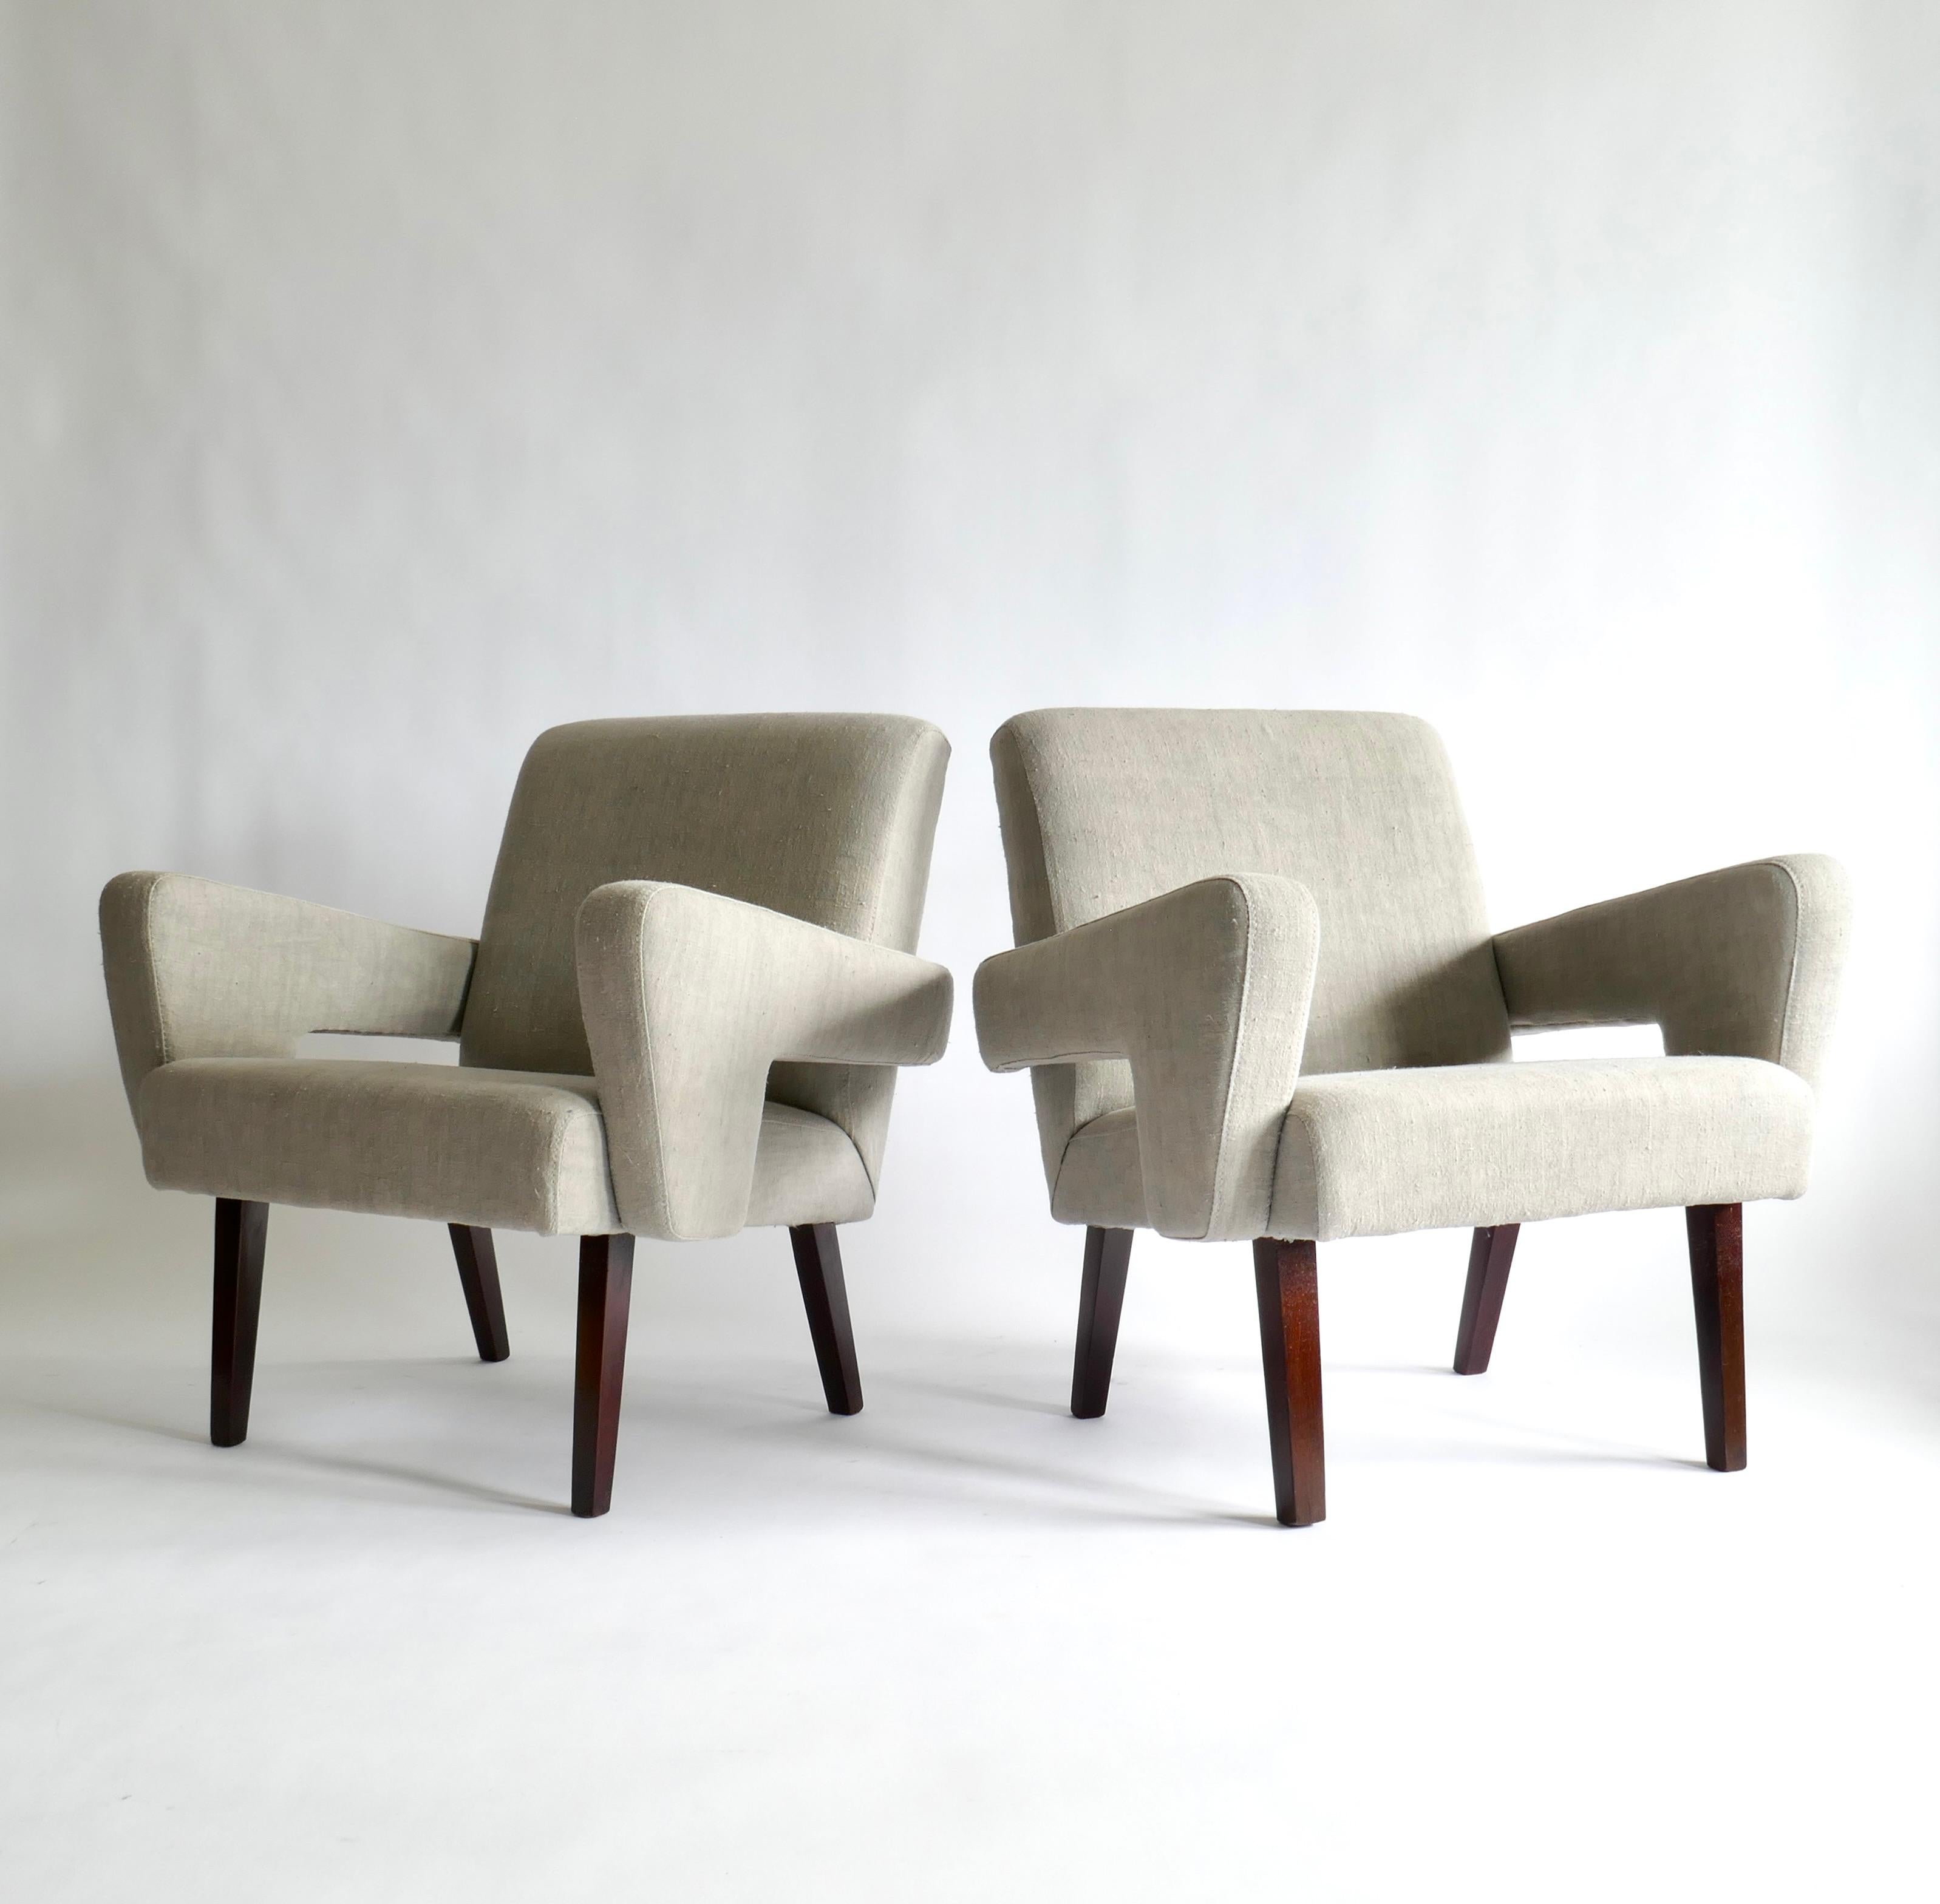 Brutalism is a style with an emphasis on materials, textures and construction, producing highly expressive forms as in this pair of armchairs with square defined shapes. Upholstered in a beautiful light grey vintage French linen that easily blends